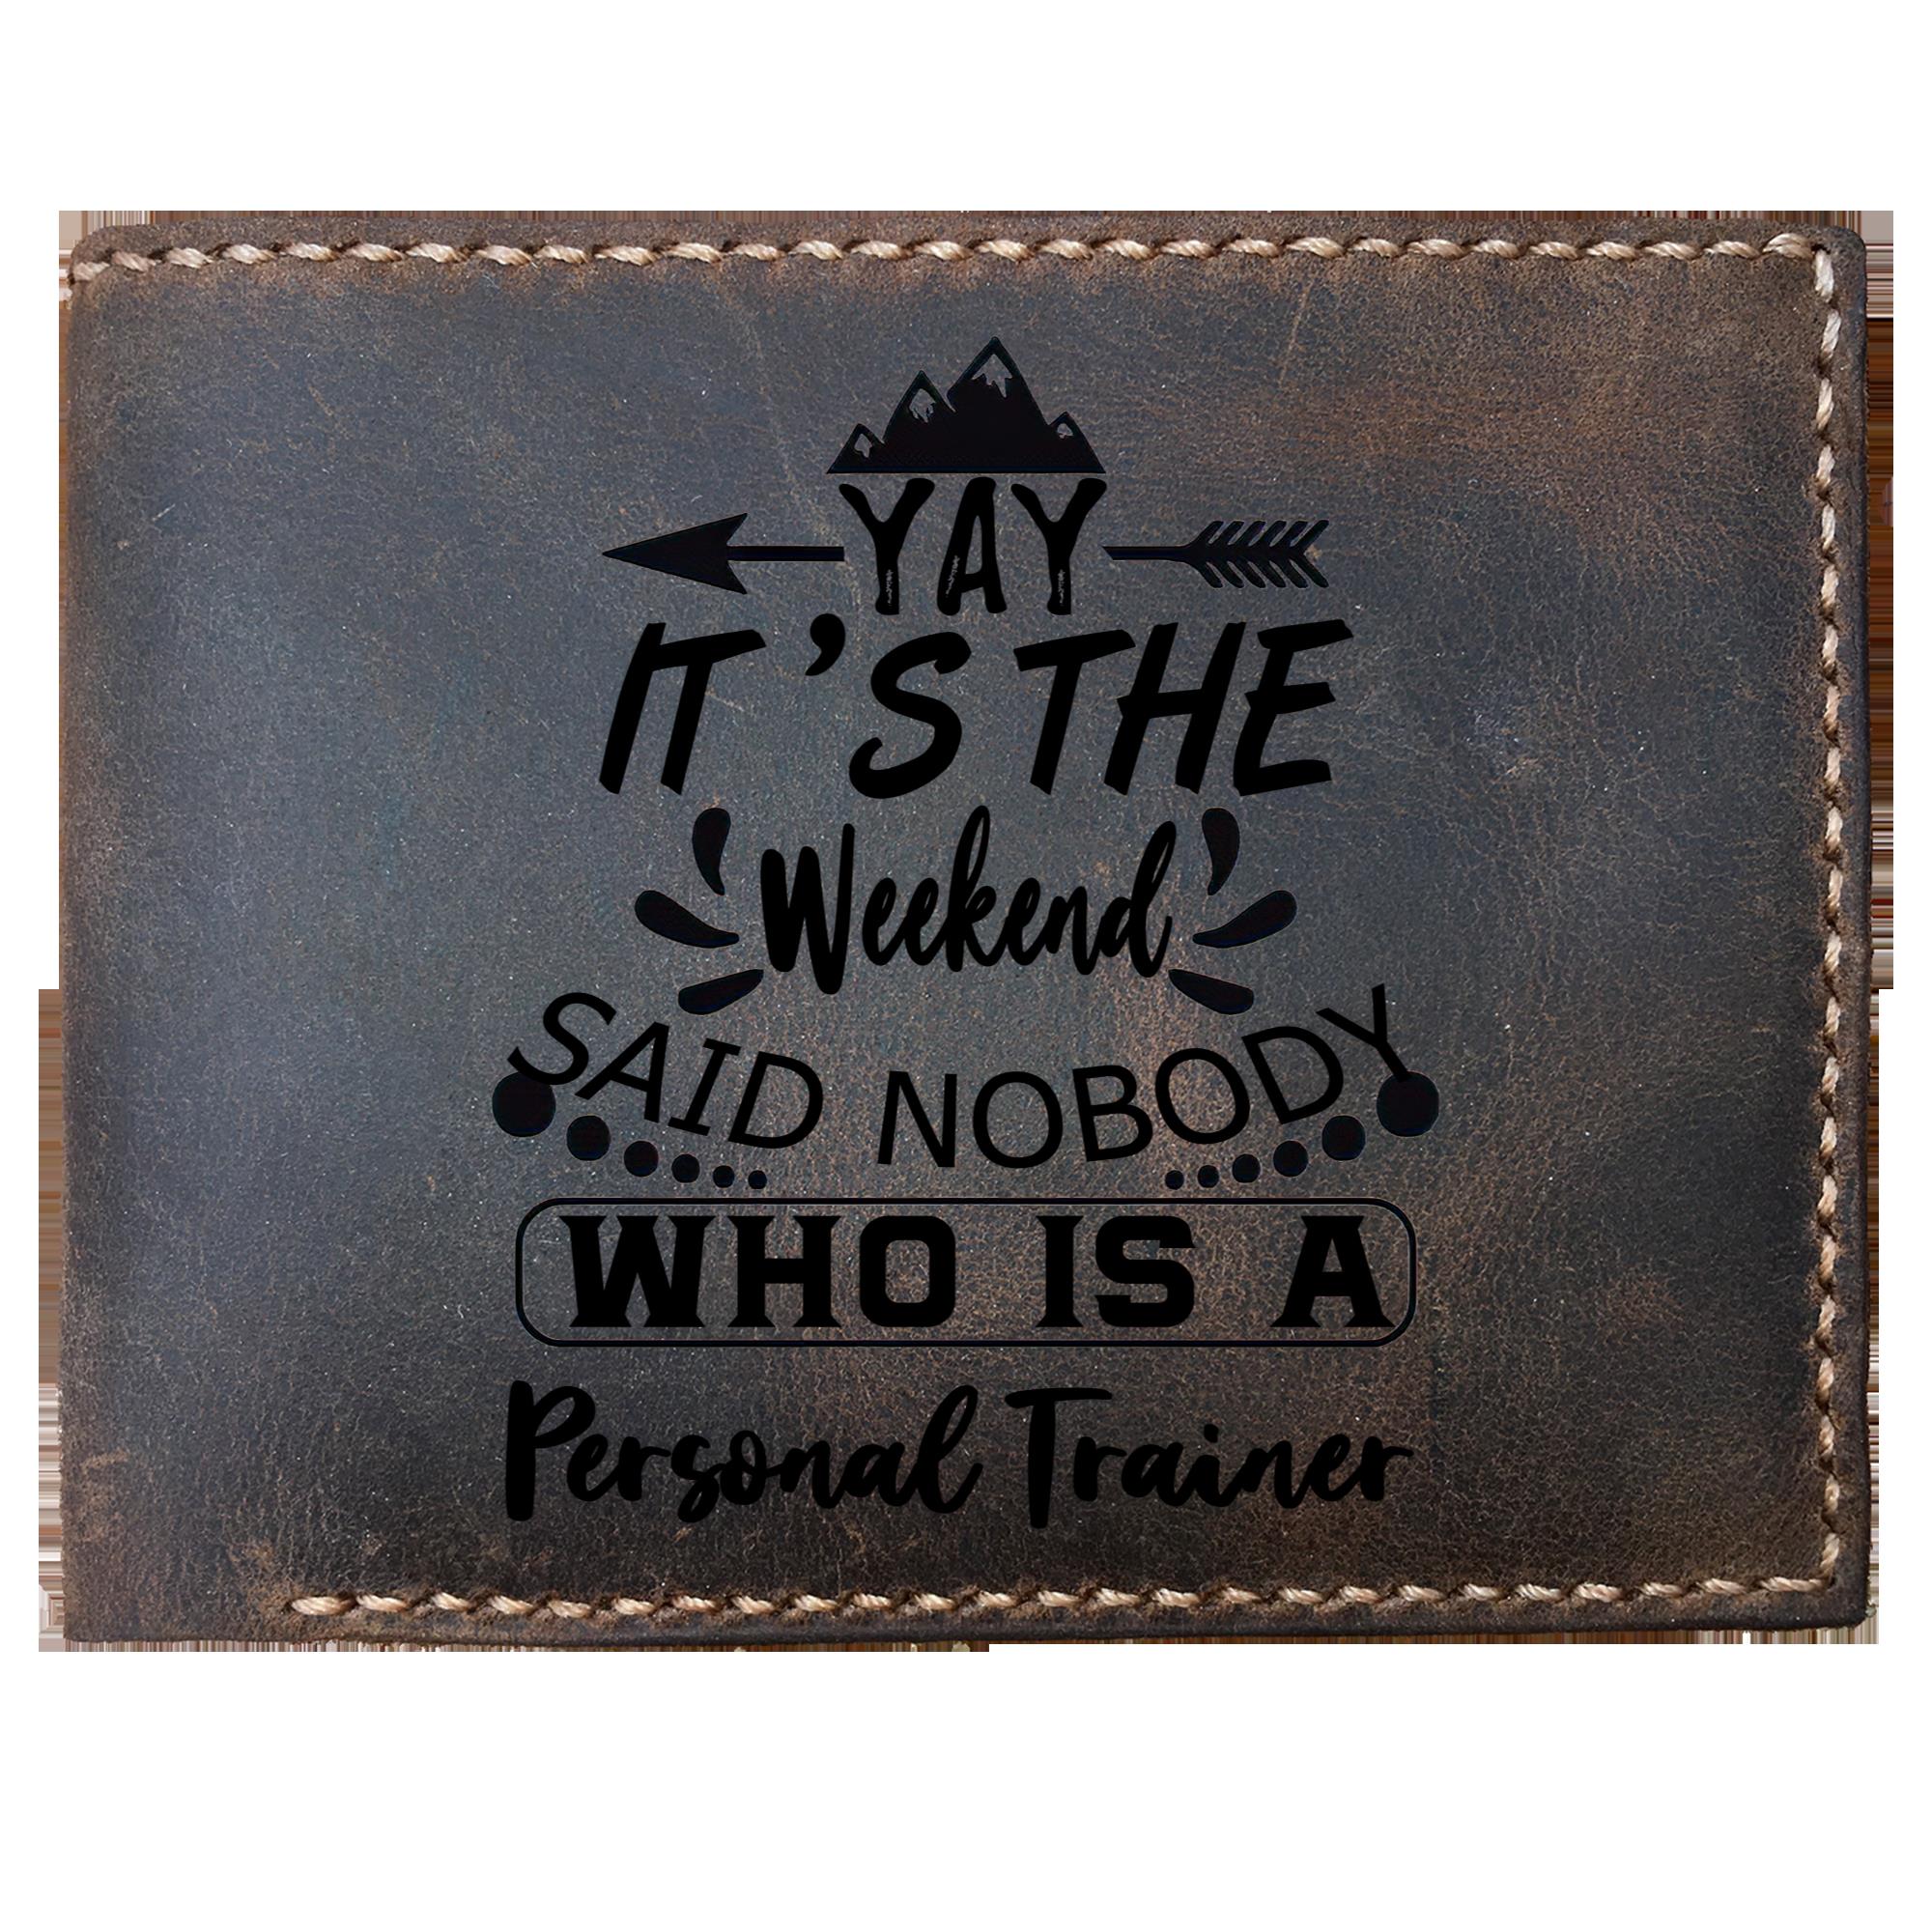 Skitongifts Funny Custom Laser Engraved Bifold Leather Wallet For Men, It's The Weekend Said Nobody Who Is A Personal Trainer, Father's Day Gifts